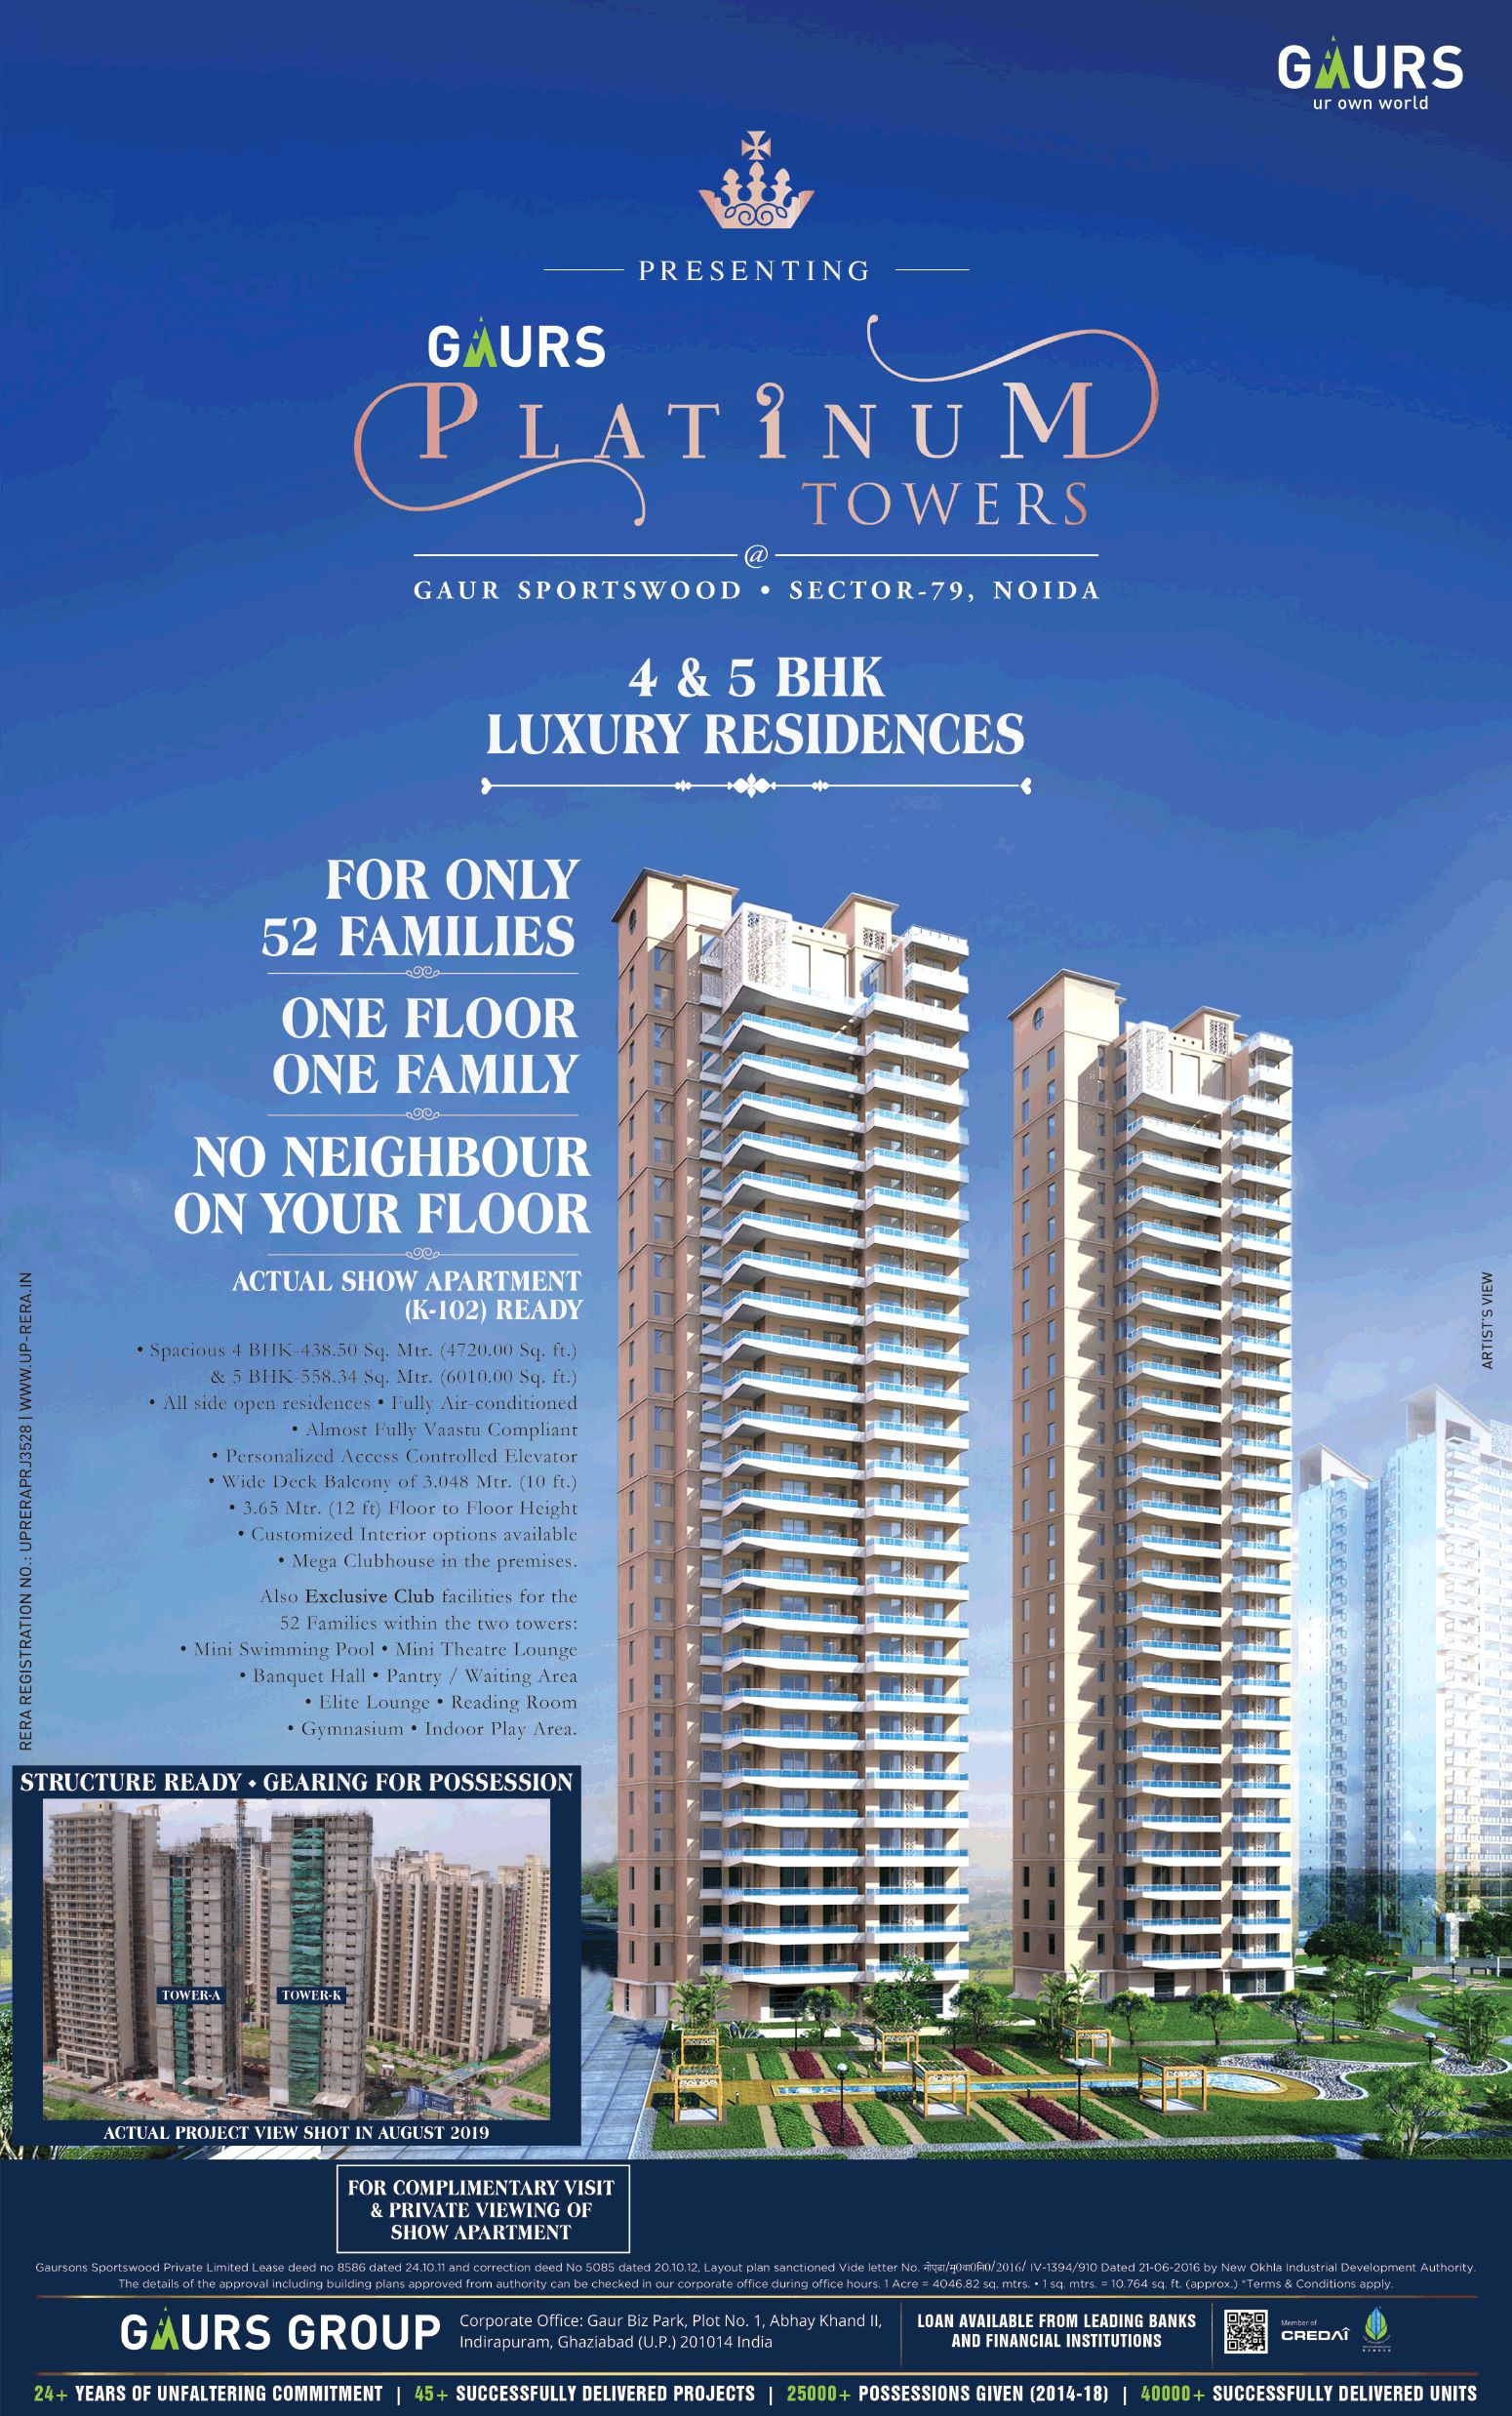 Book 4/5 BHK luxury residences at Gaurs Platinum Towers in Sector 79, Noida